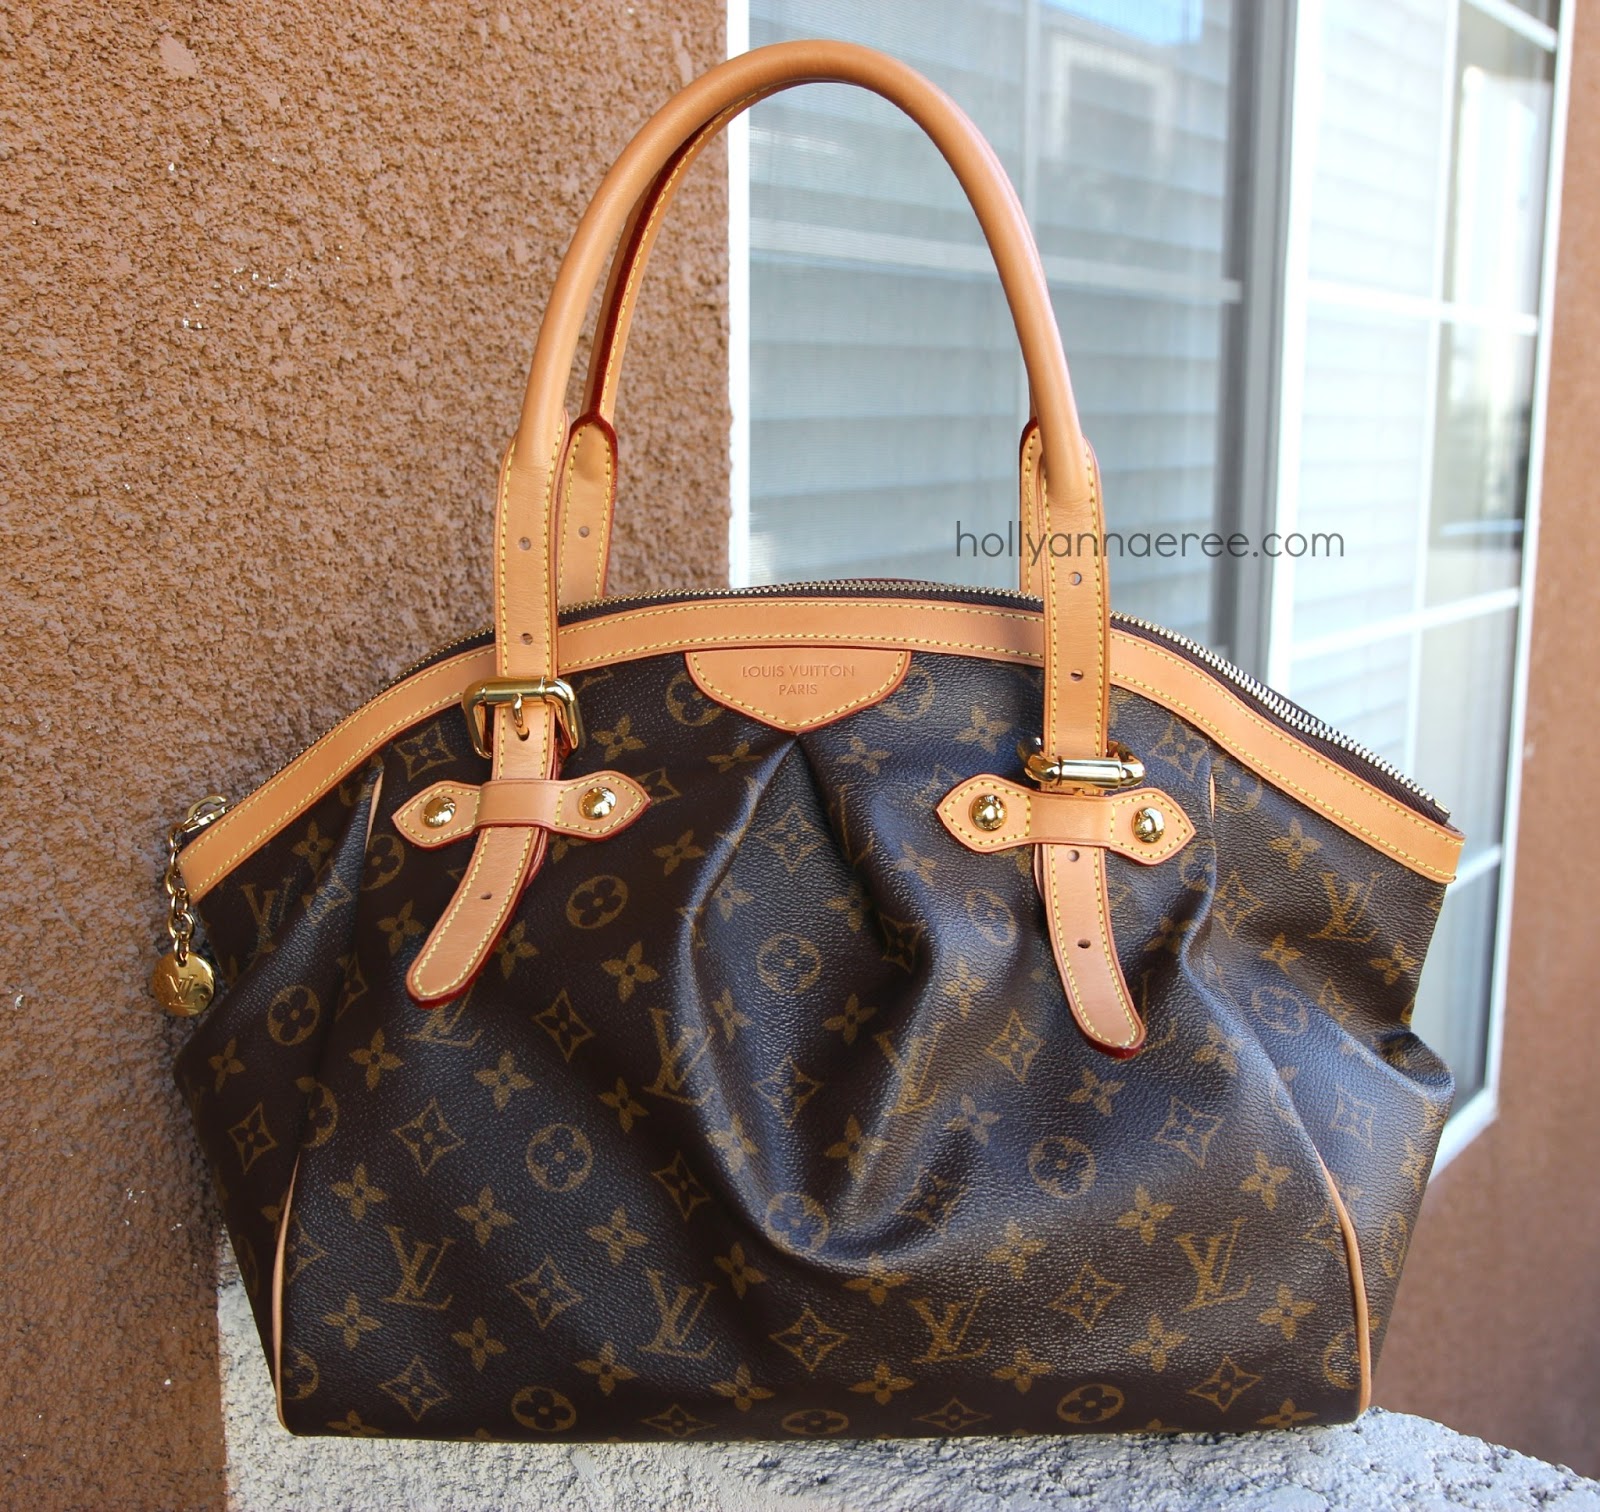 Mom's Well Loved Louis Vuitton Tivoli PM - FOR SALE, Holly Ann-AeRee 2.0